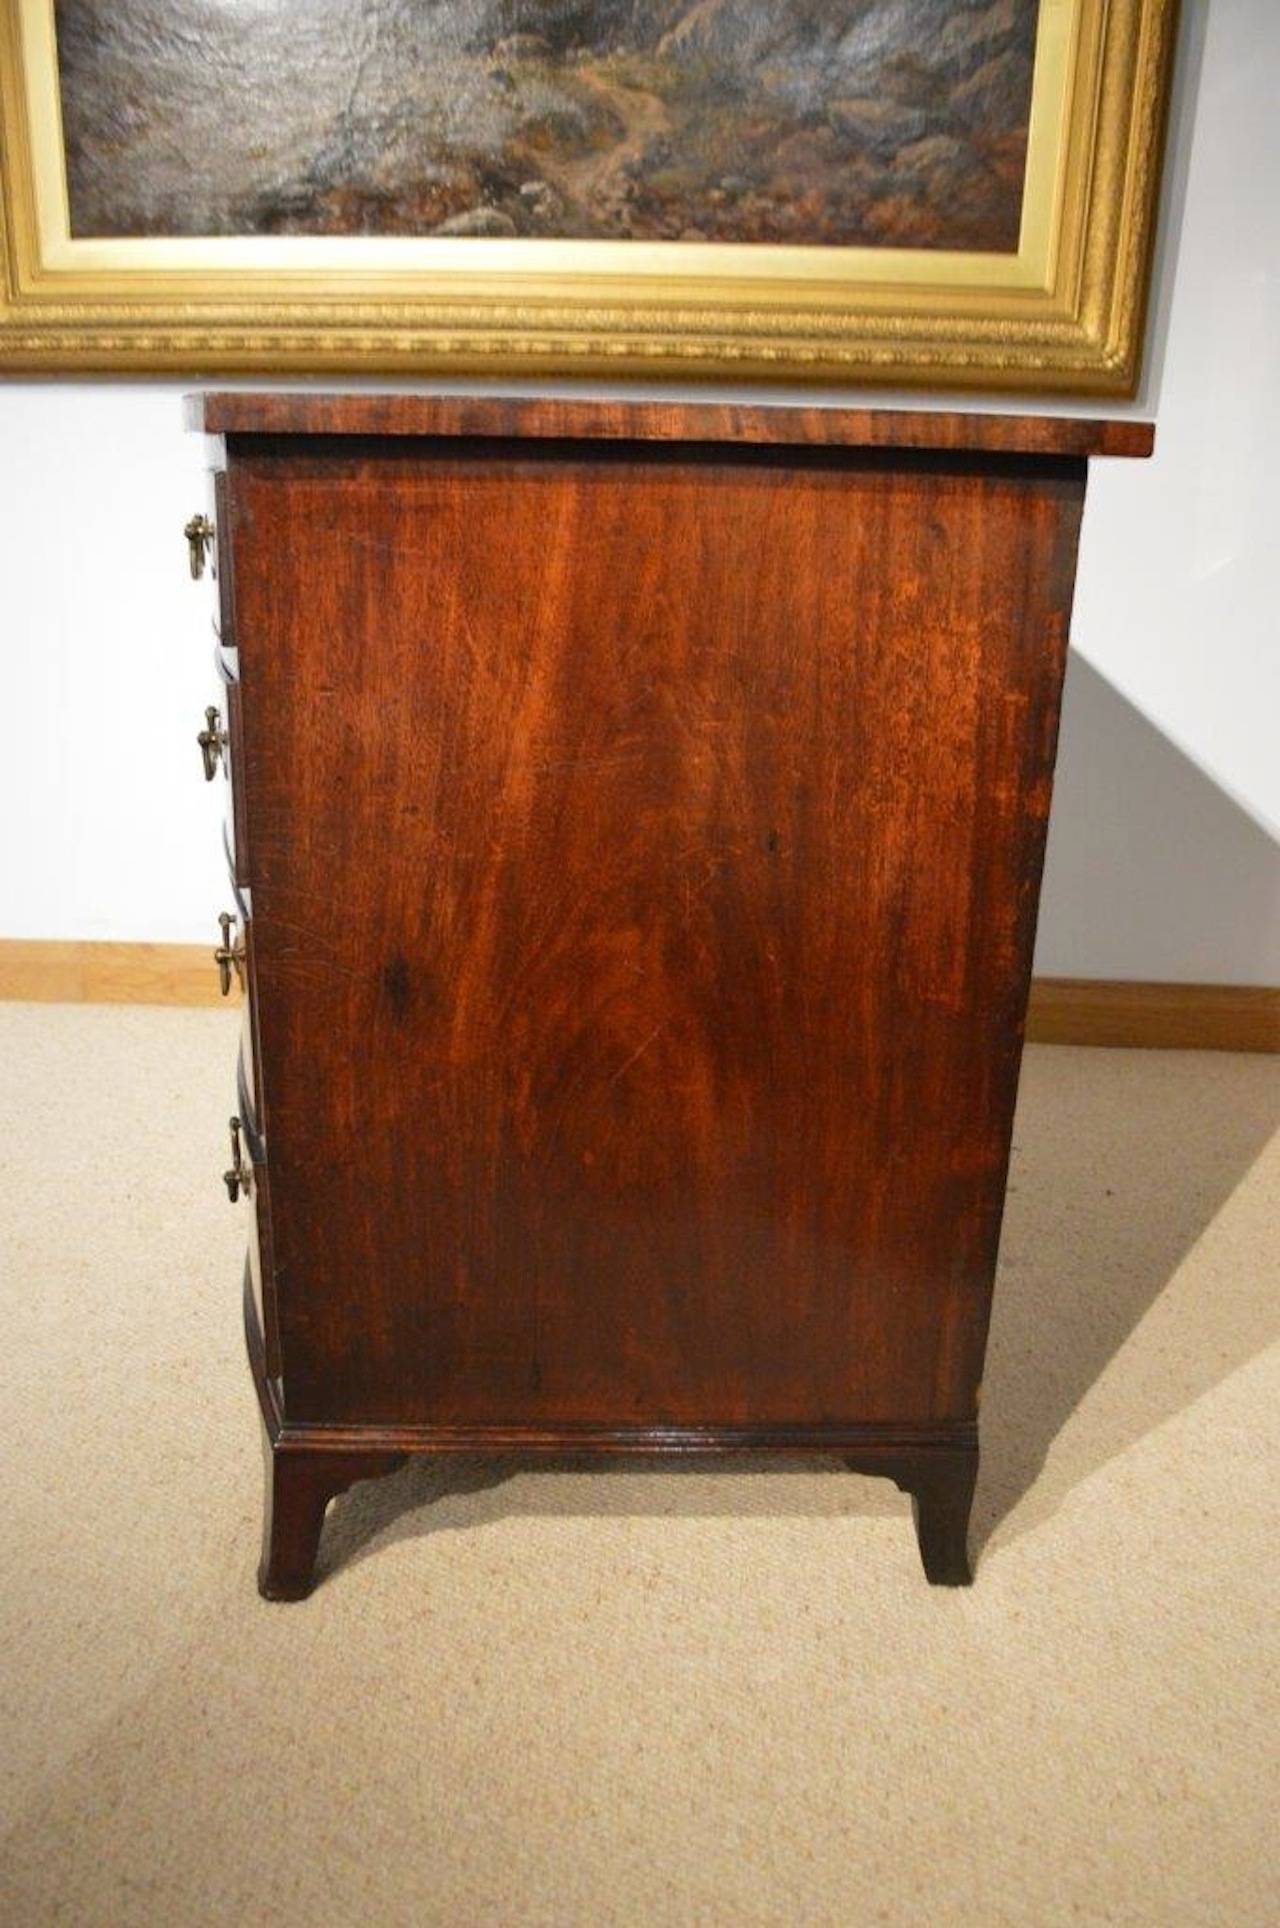 Early 19th Century A Mahogany Regency Period Bow Front Antique Chest Of Drawers